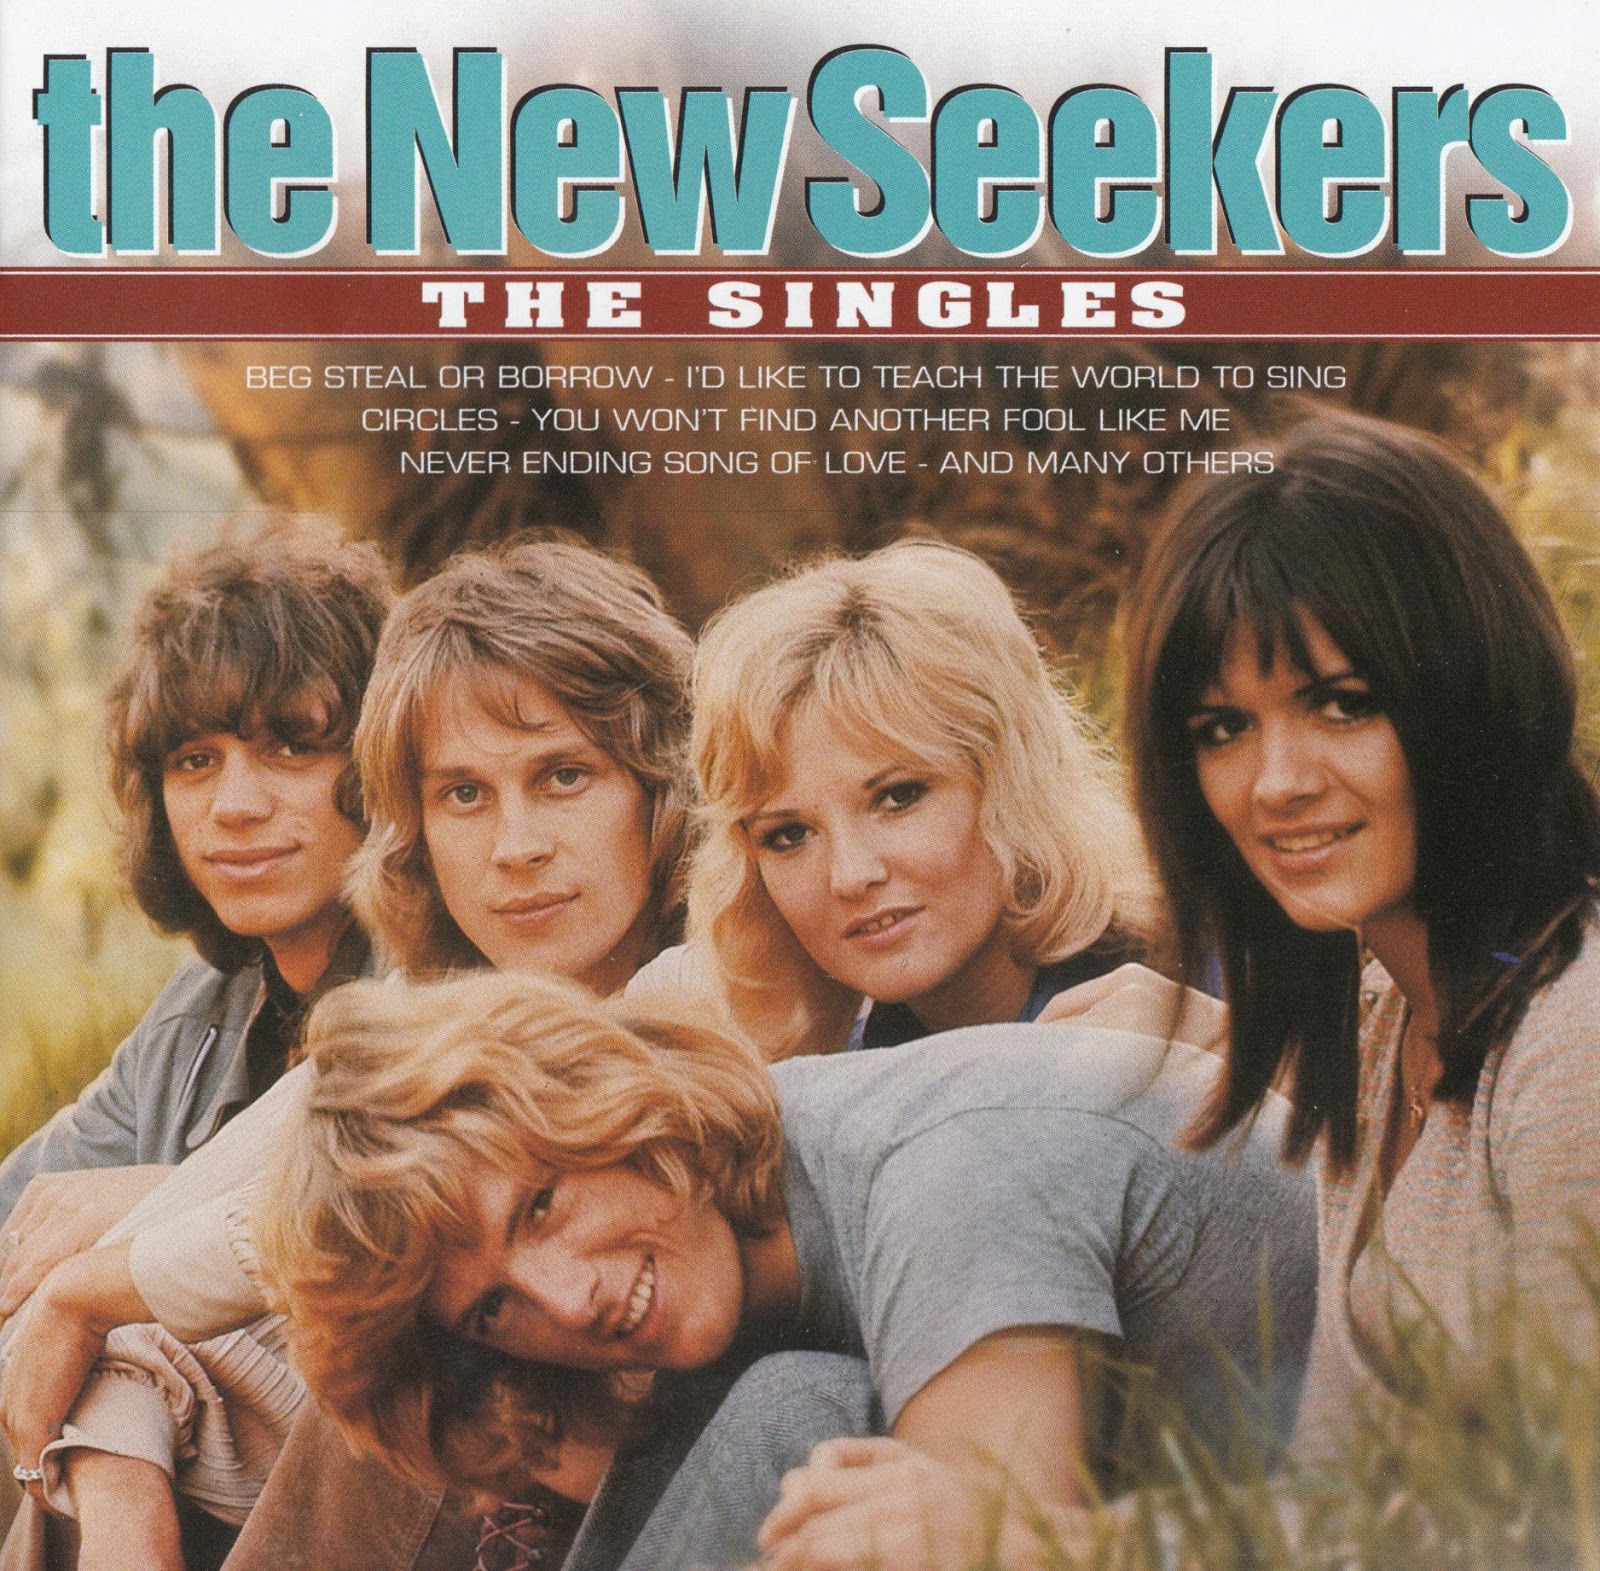 Sing world. Группа the Seekers. The New Seekers the Singles. The New Seekers the Singles CD. The New Seekers collection album.